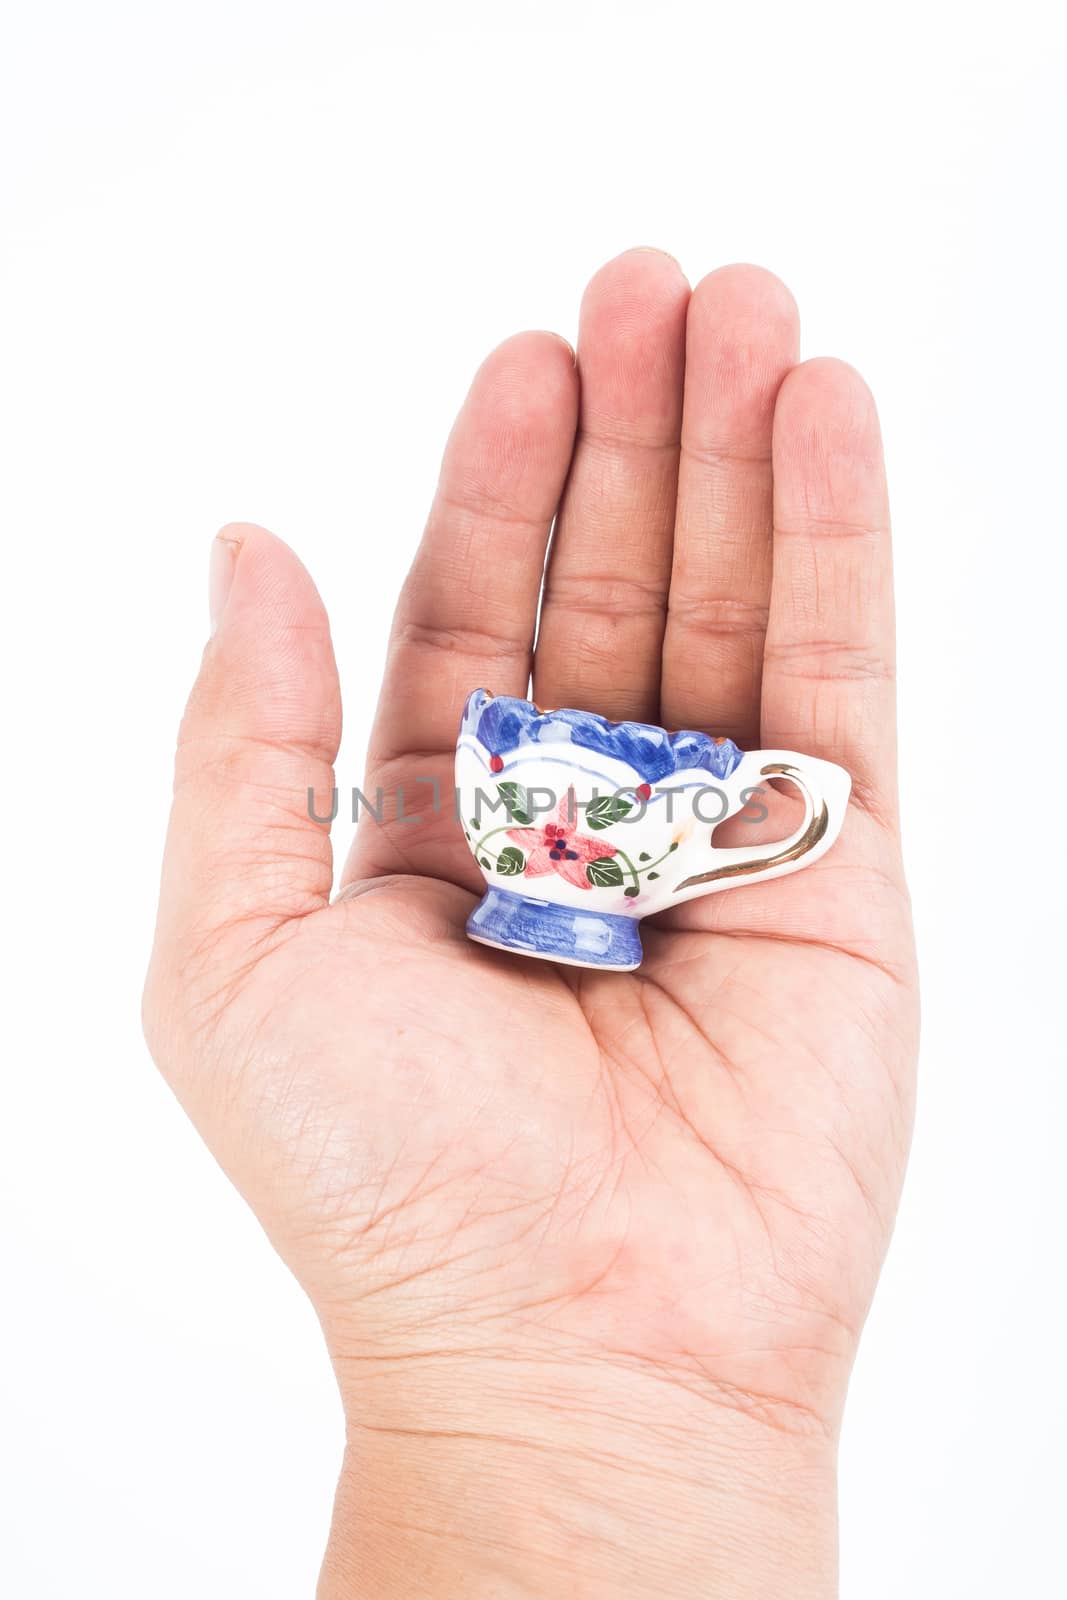 small ceramic cup in hand by simpleBE